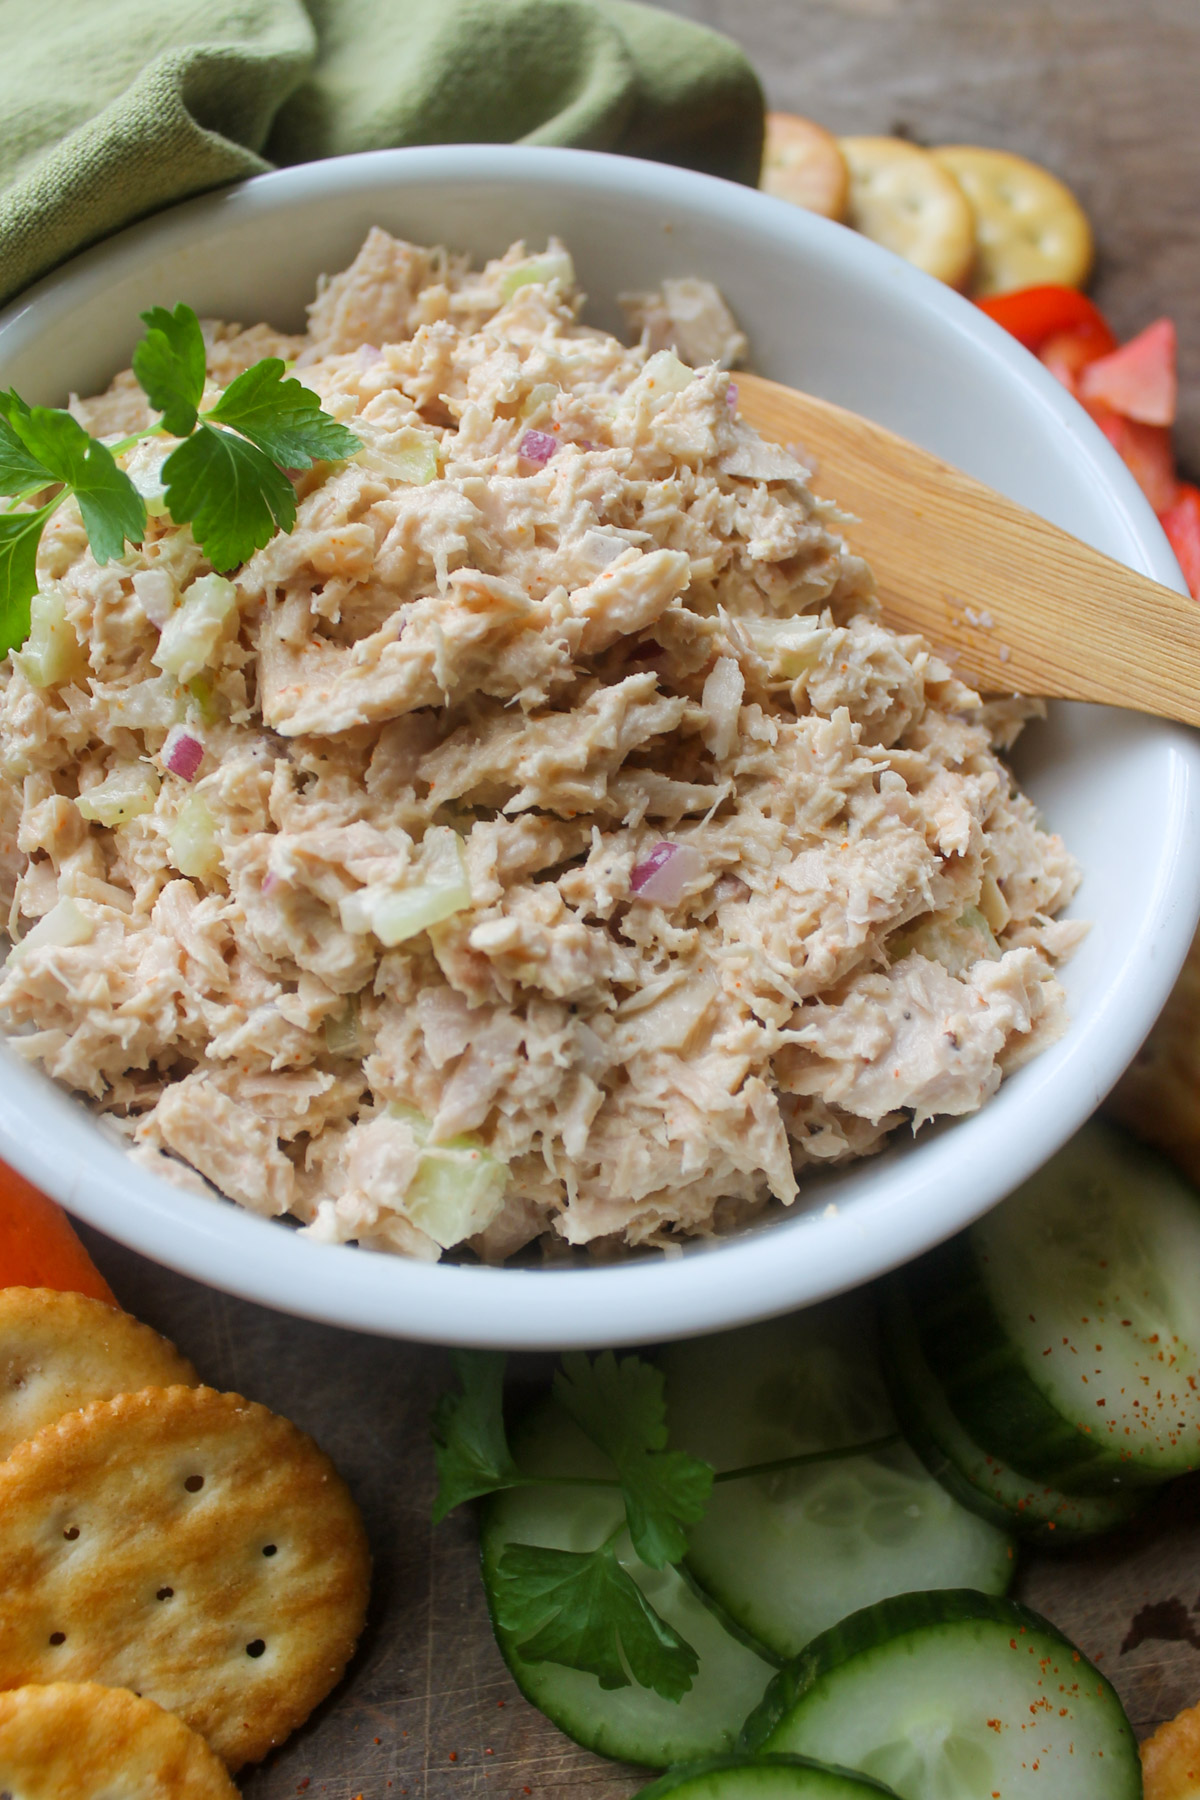 Tuna salad in a bowl served with crackers.